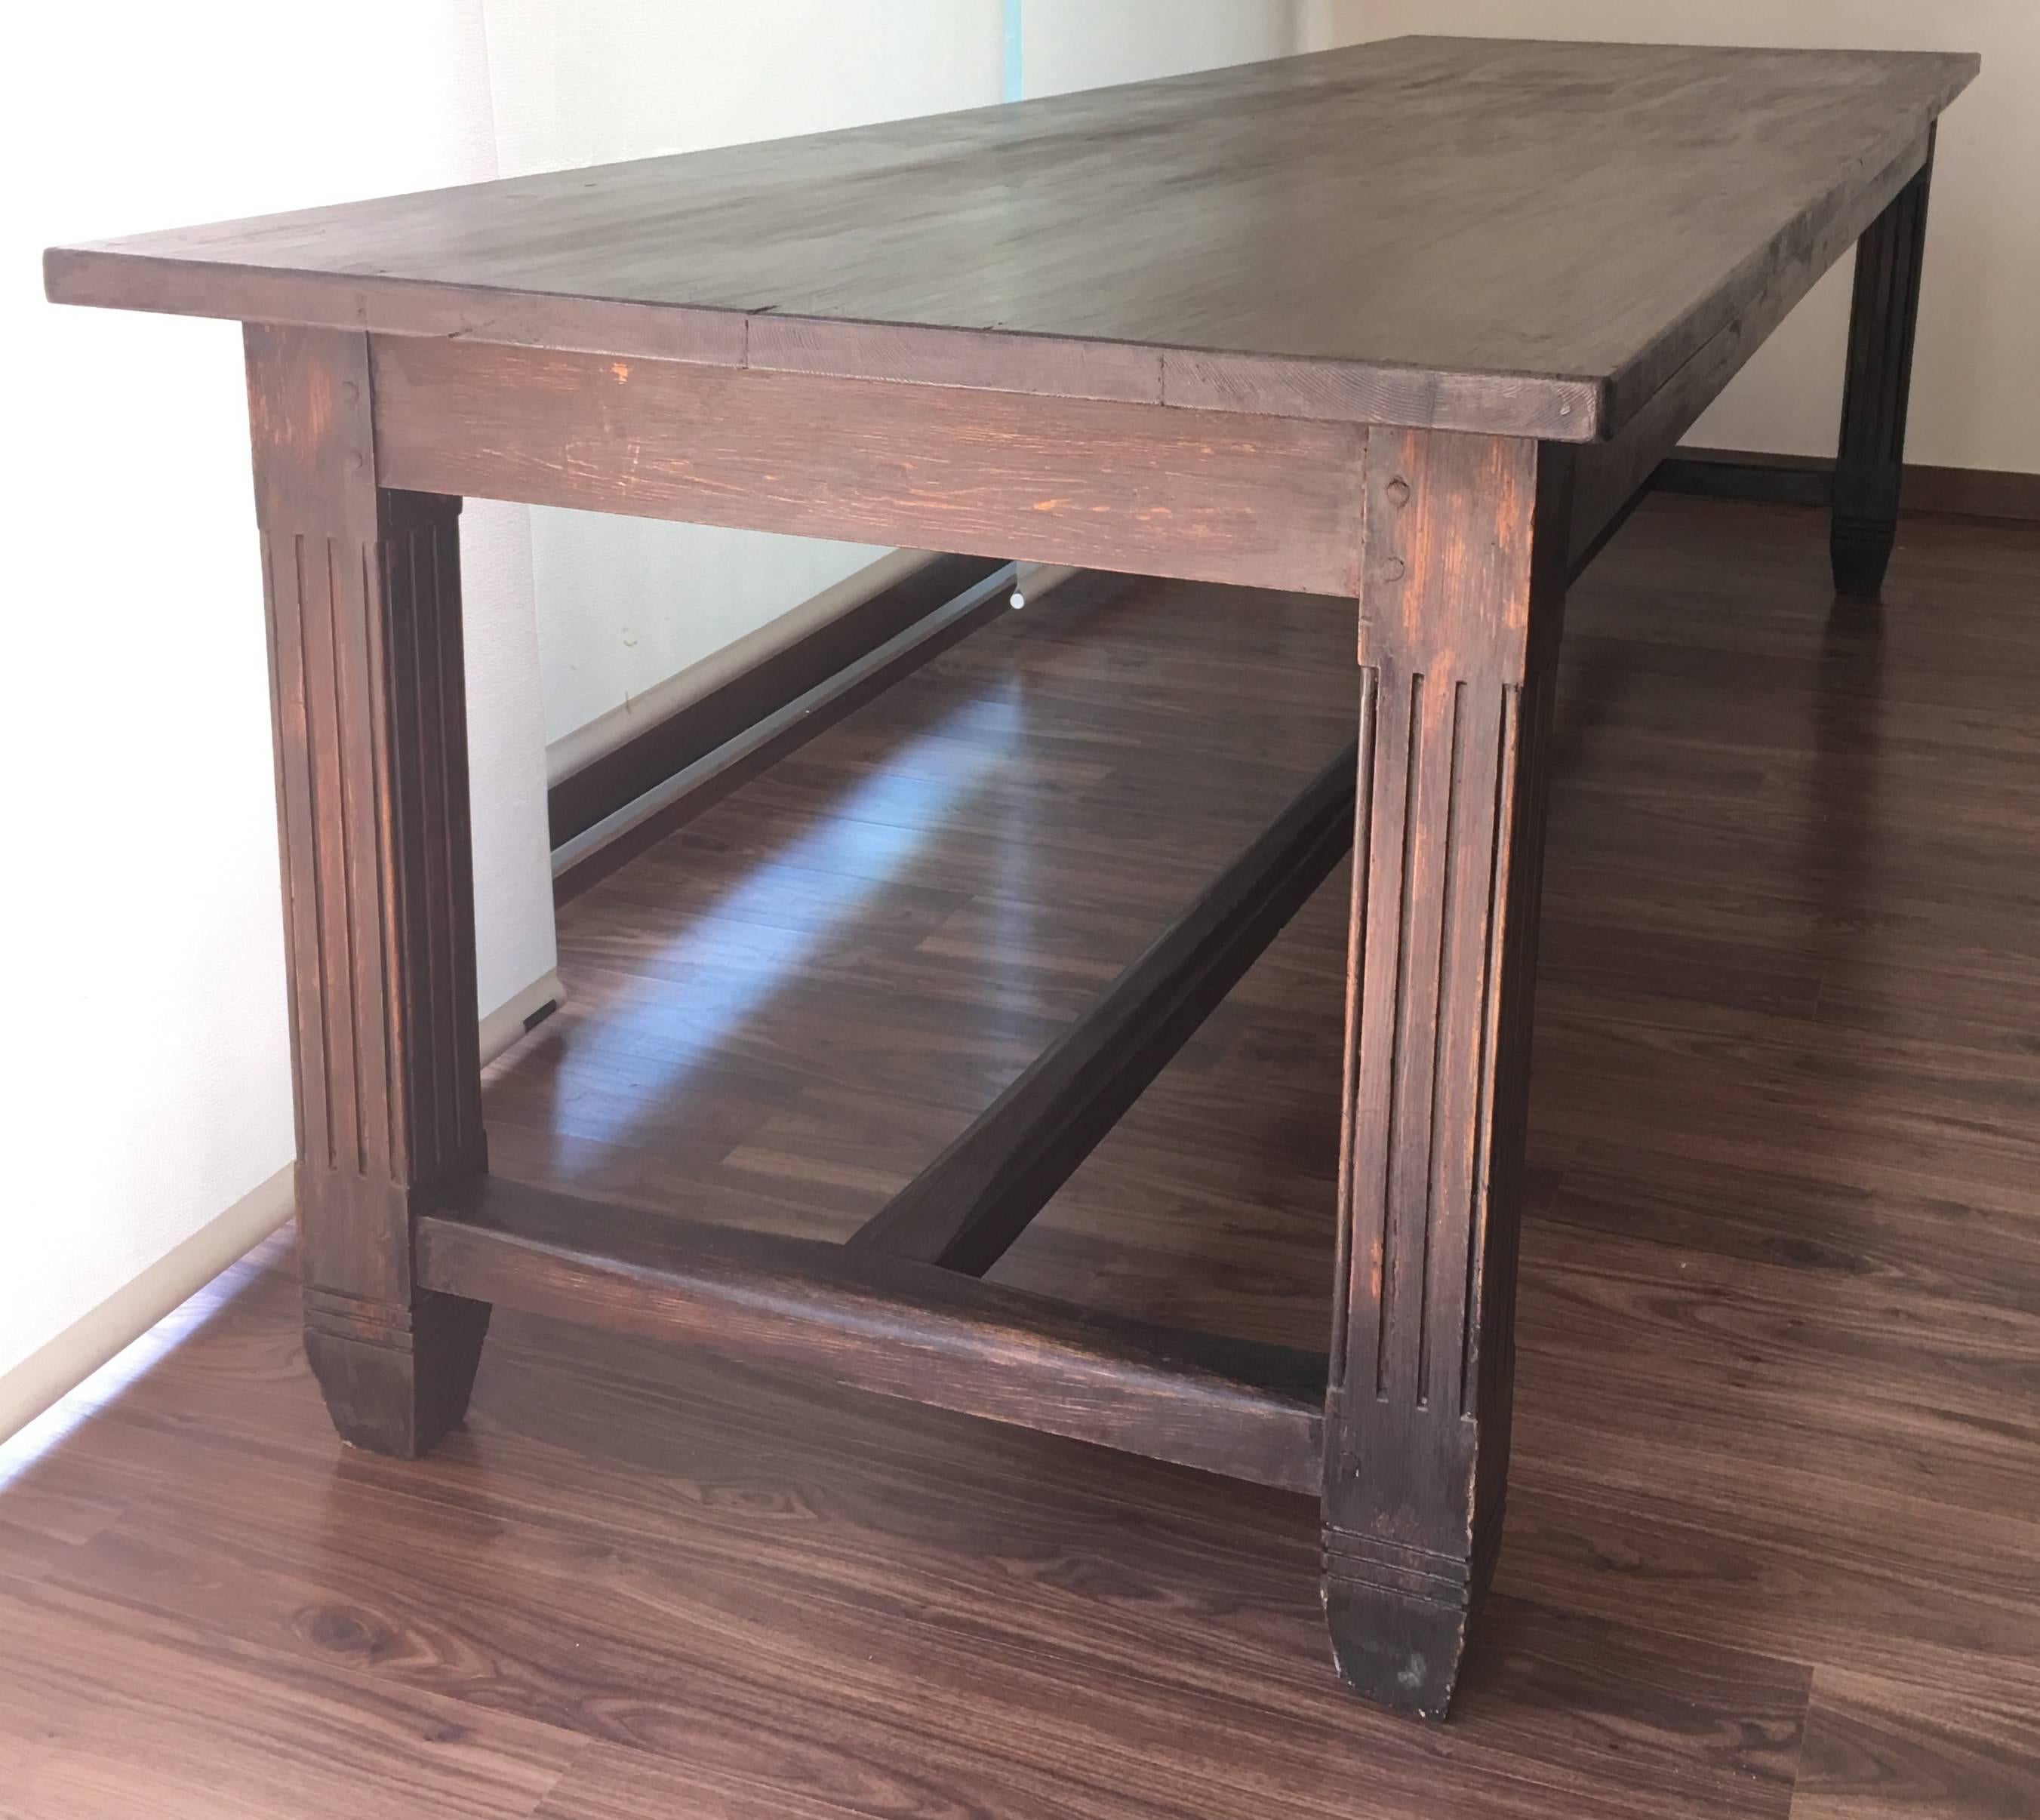 20th century large Spanish farm table dining room with beautiful patina
table in solid wood
restored

